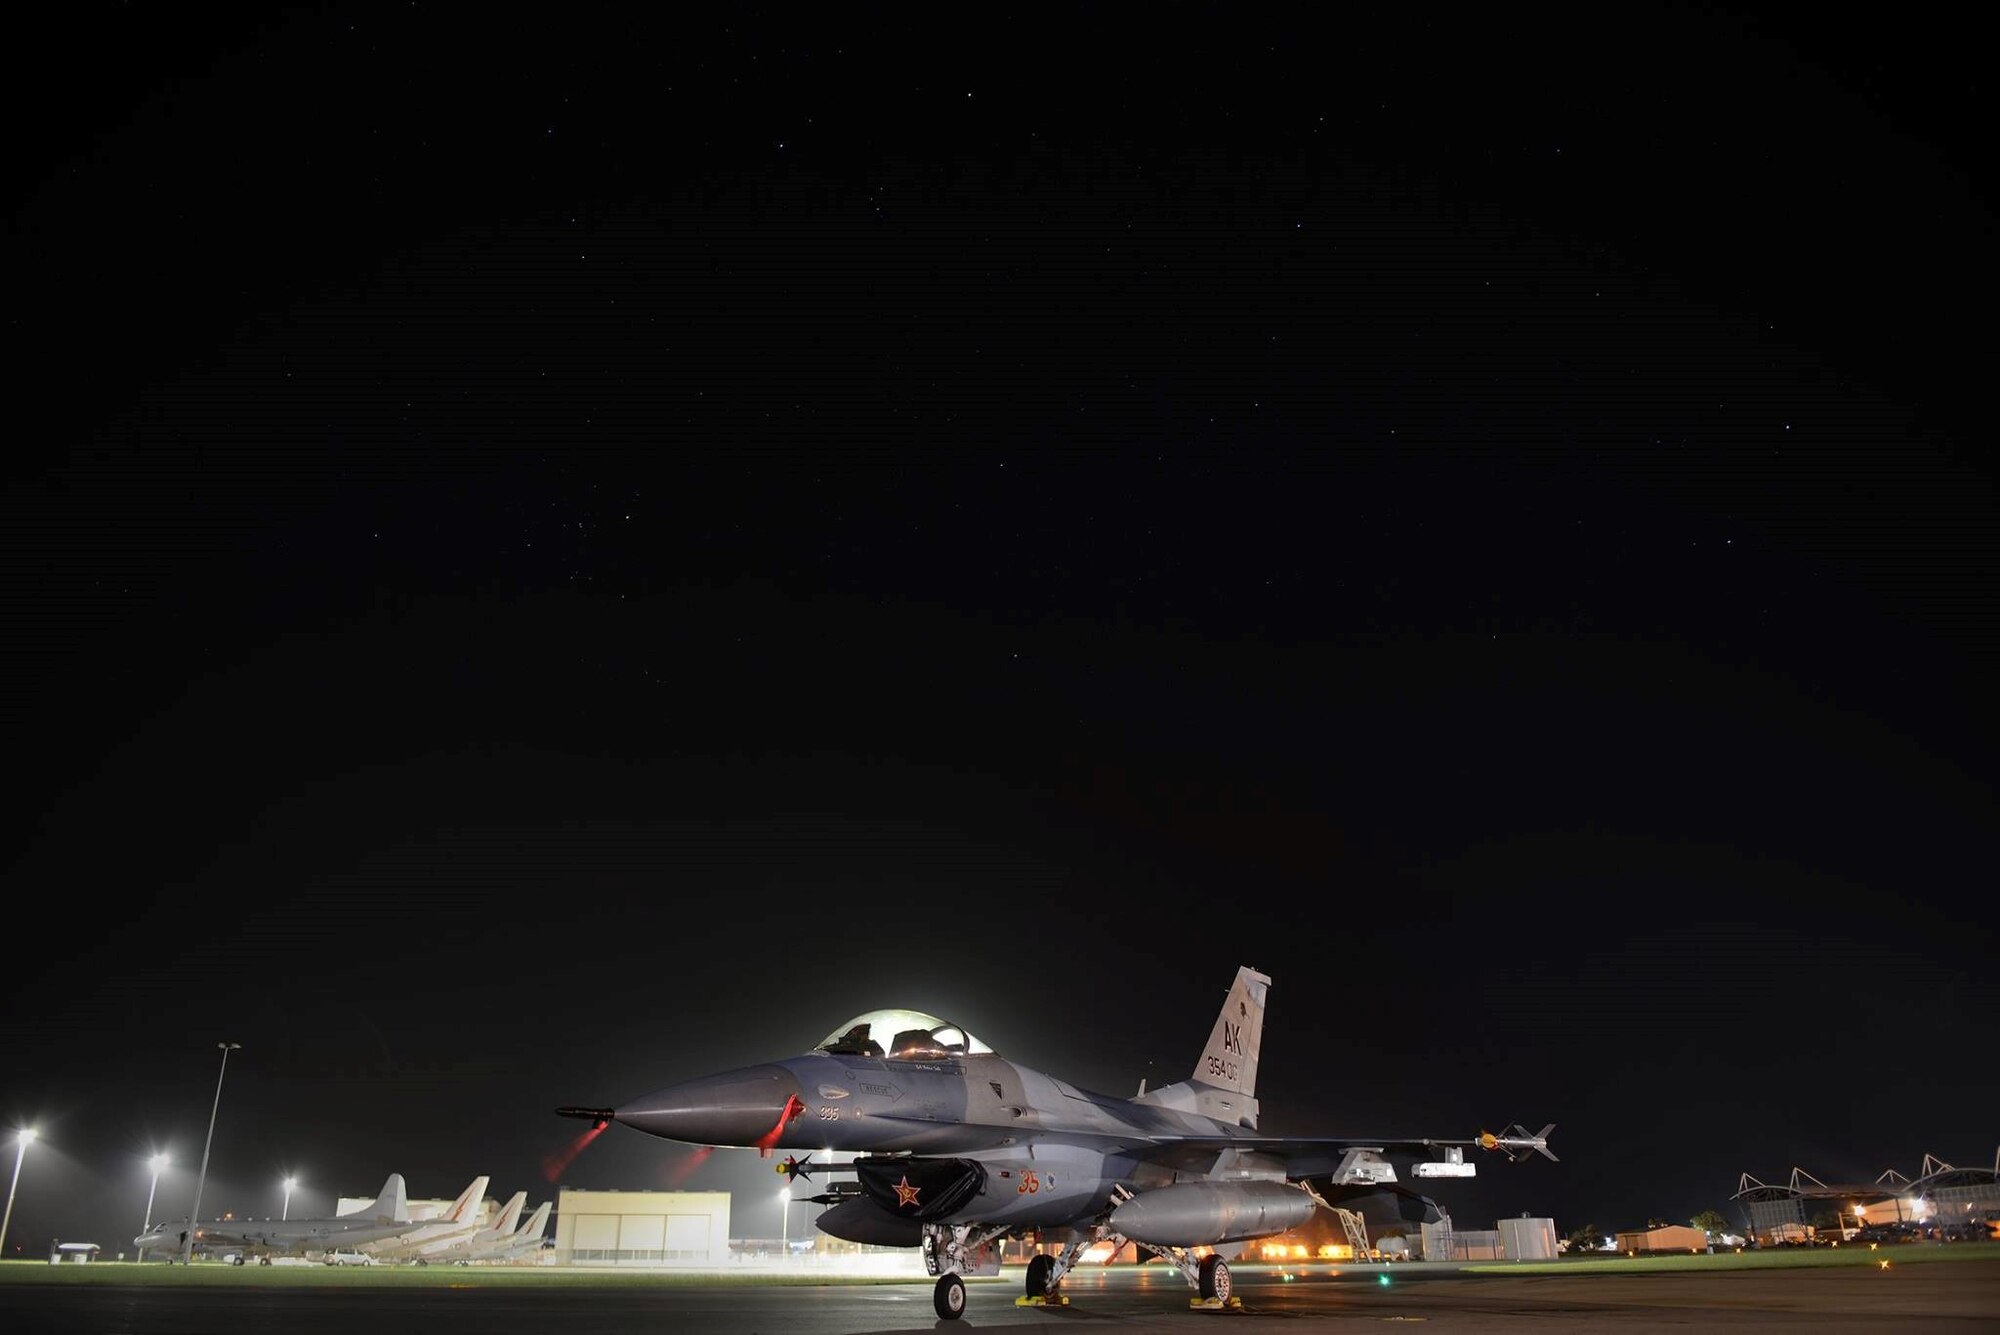 The U.S. Air Force 354th Operations Group F-16 Fighting Falcon flagship sits on the tarmac at Royal Australian Air Force Base Williamtown, in New South Wales, Australia, March 19, 2017. Exercise Diamond Shield 2017, the second of four Diamond Series exercises conducted by the RAAF Air Warfare Centre, is an Australian Defence Force training activity where high-readiness forces deploy quickly to remote locations in Australia in response to a simulated security threat. The exercise will see members of the ADF Navy, Army and Air Force rapidly deploy to counter a fictitious force posing a threat to Australia's national security in the Kimberley region in North Western Australia. (U.S. Air Force photo by Tech. Sgt. Steven R. Doty) 